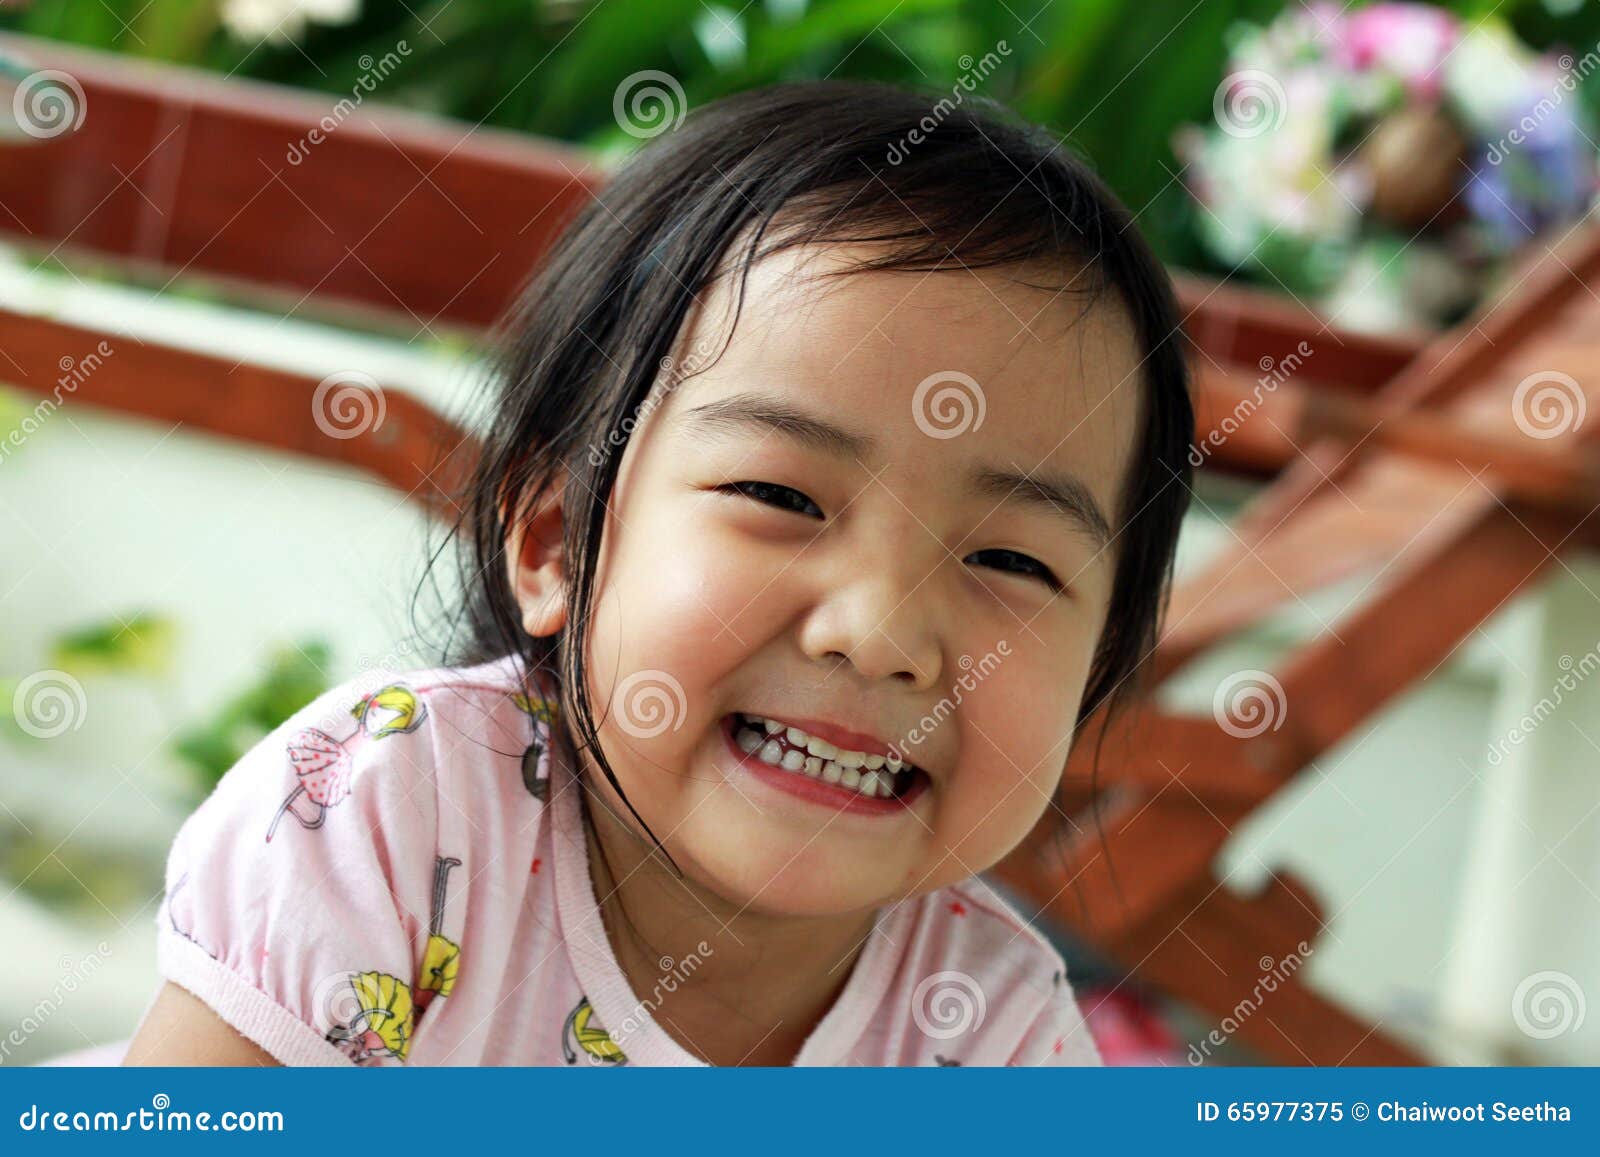 Little girl smile stock image. Image of count, good, hand - 65977375